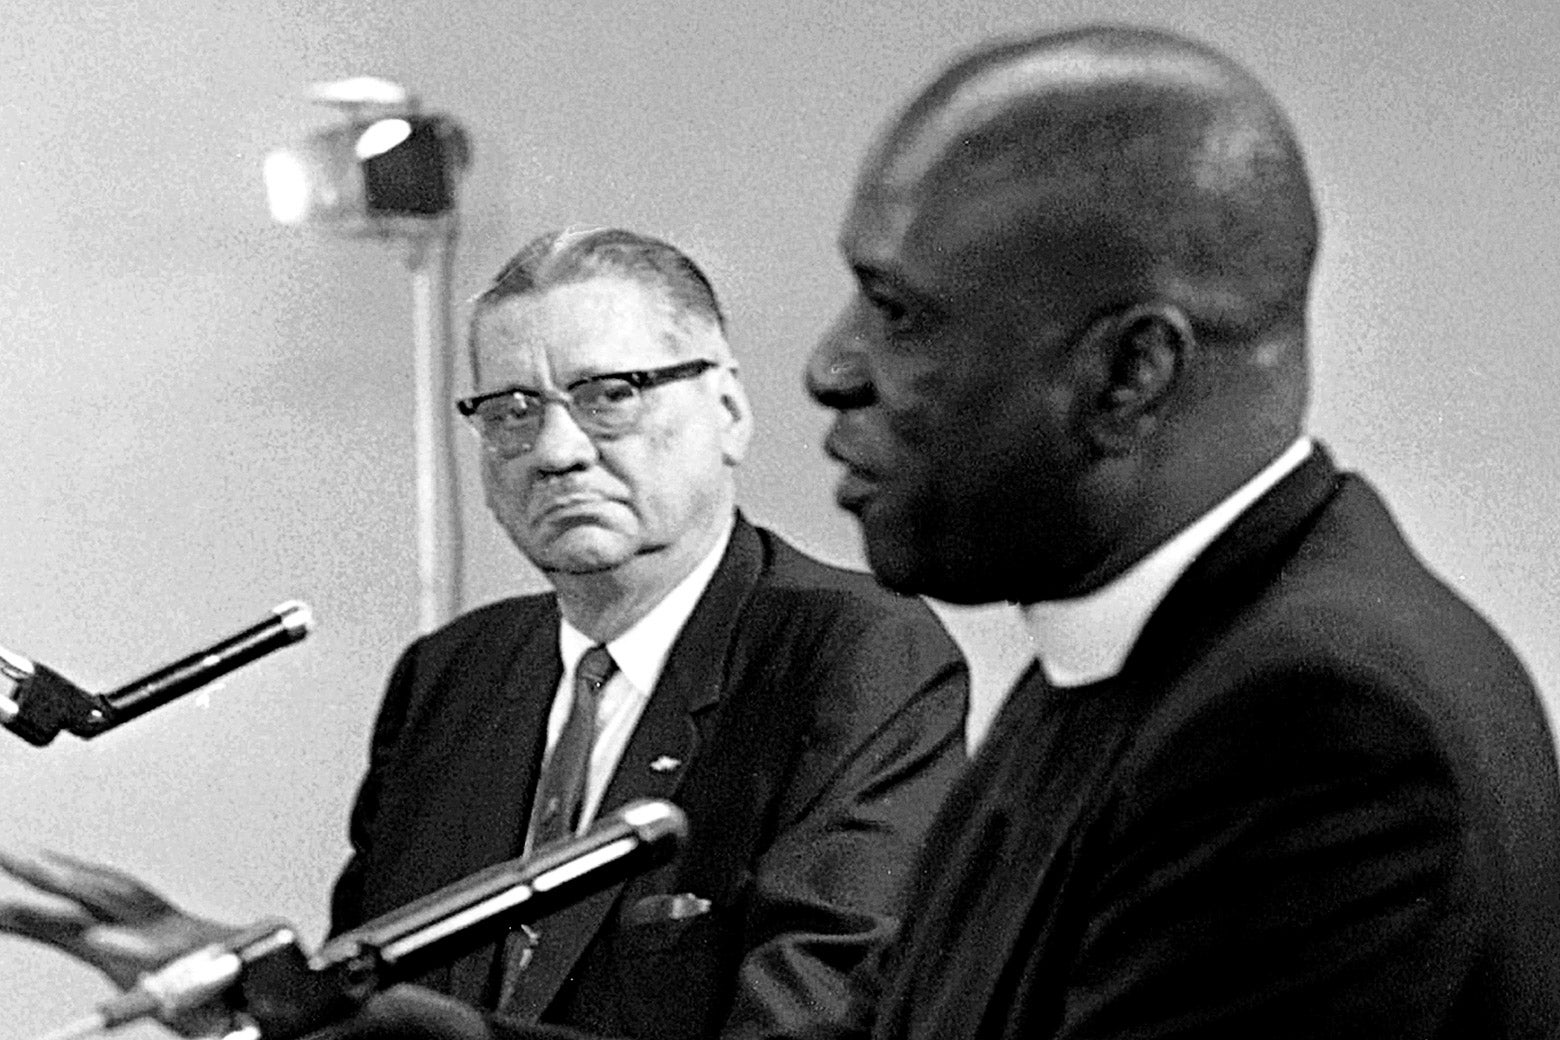 A black-and-white photo featuring Walter Headley and Theodore Gibson seated in front of microphones.